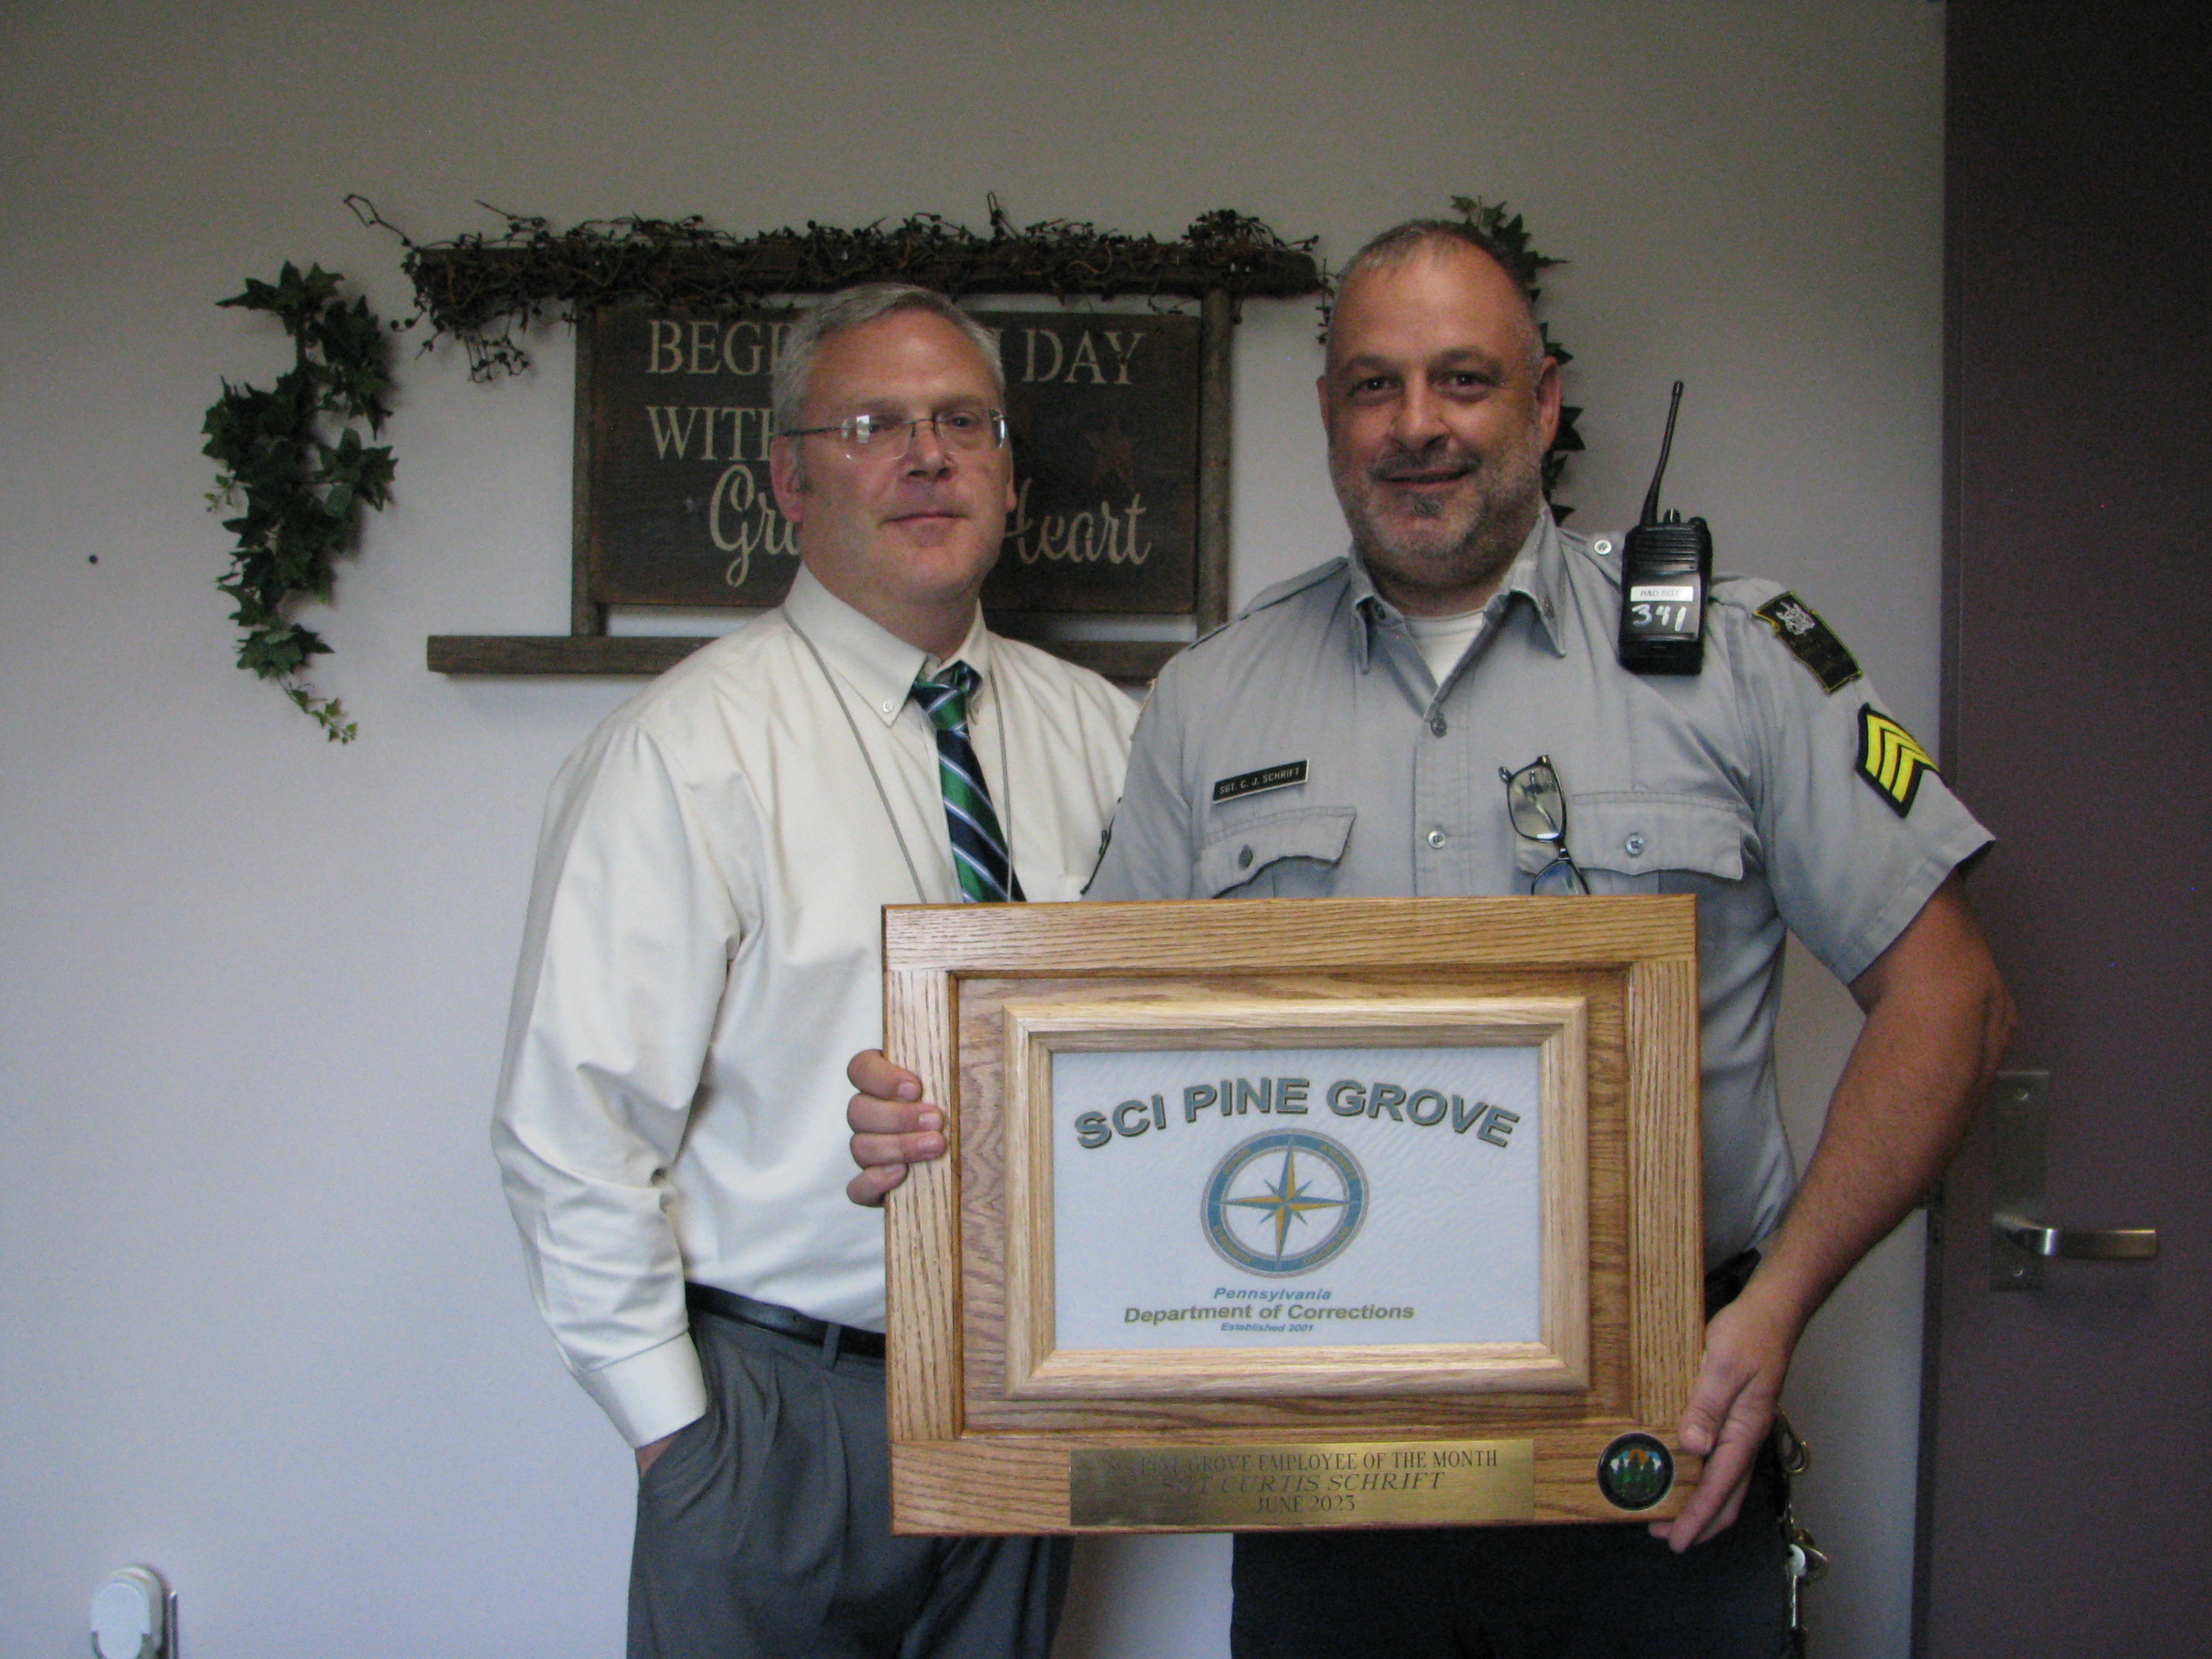 Sgt. Curtis Schrift holds his Employee of the Month certificate with Superintendent Mark Brothers.